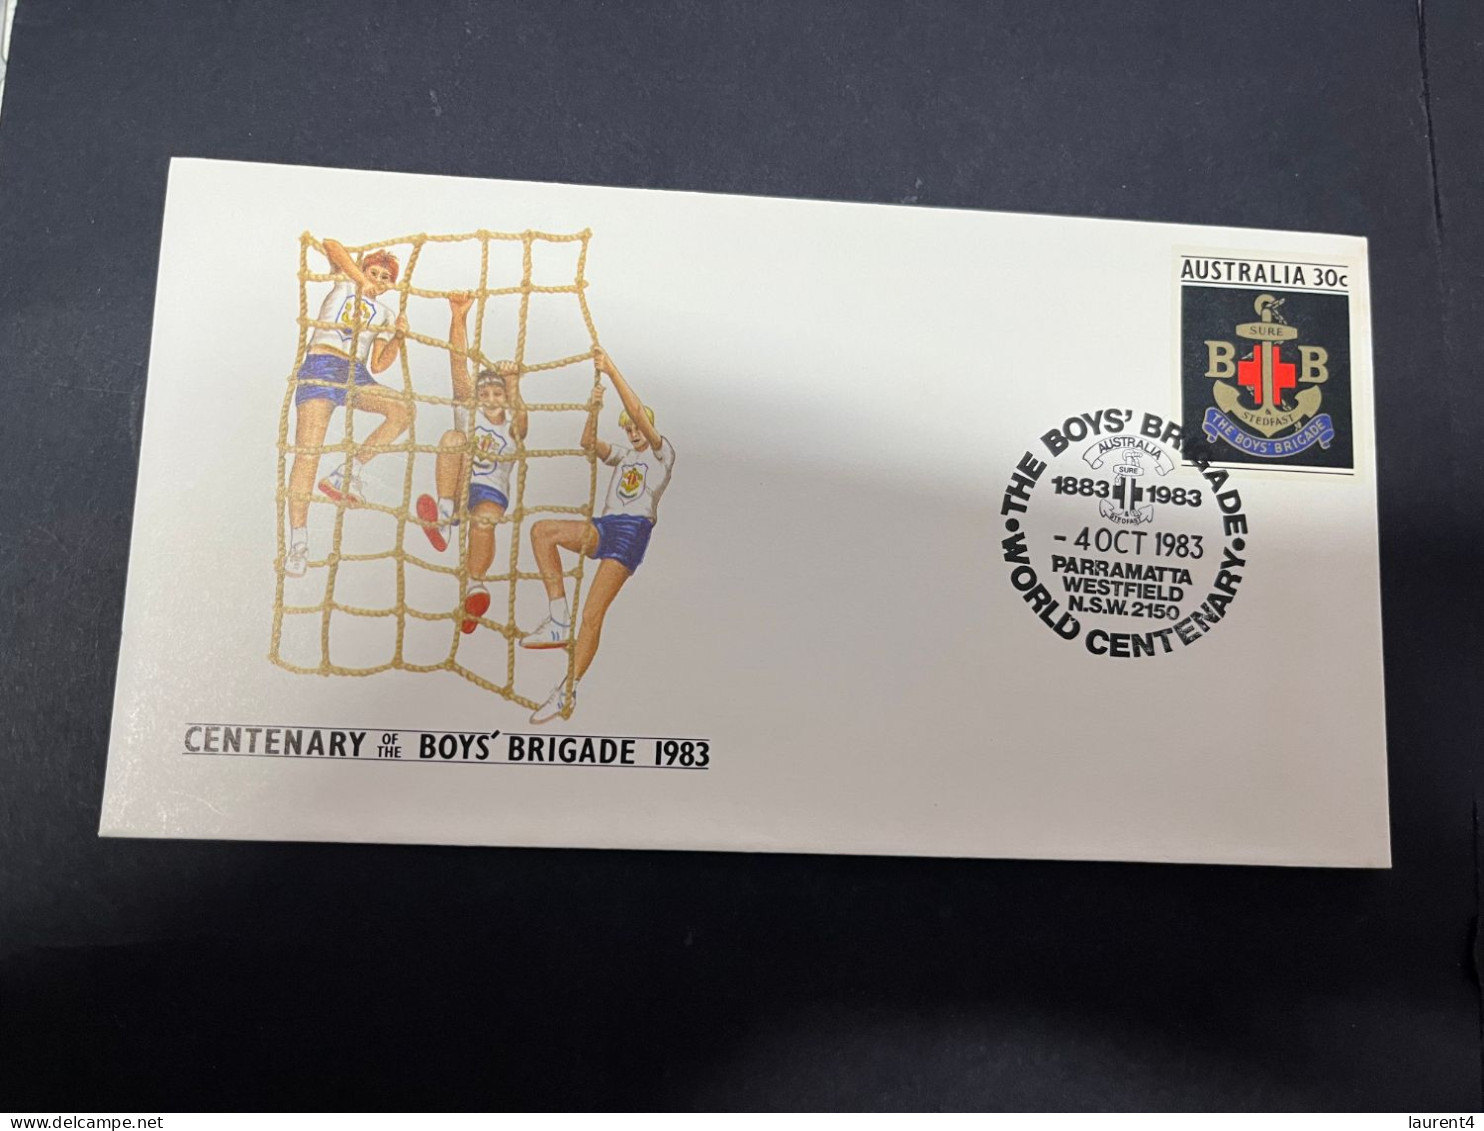 17-4-2024 (2 X 19) Australia - 1983 - Centenary Of The Boys' Brigade + SCOUTS + Canberra - 3 Covers - Premiers Jours (FDC)